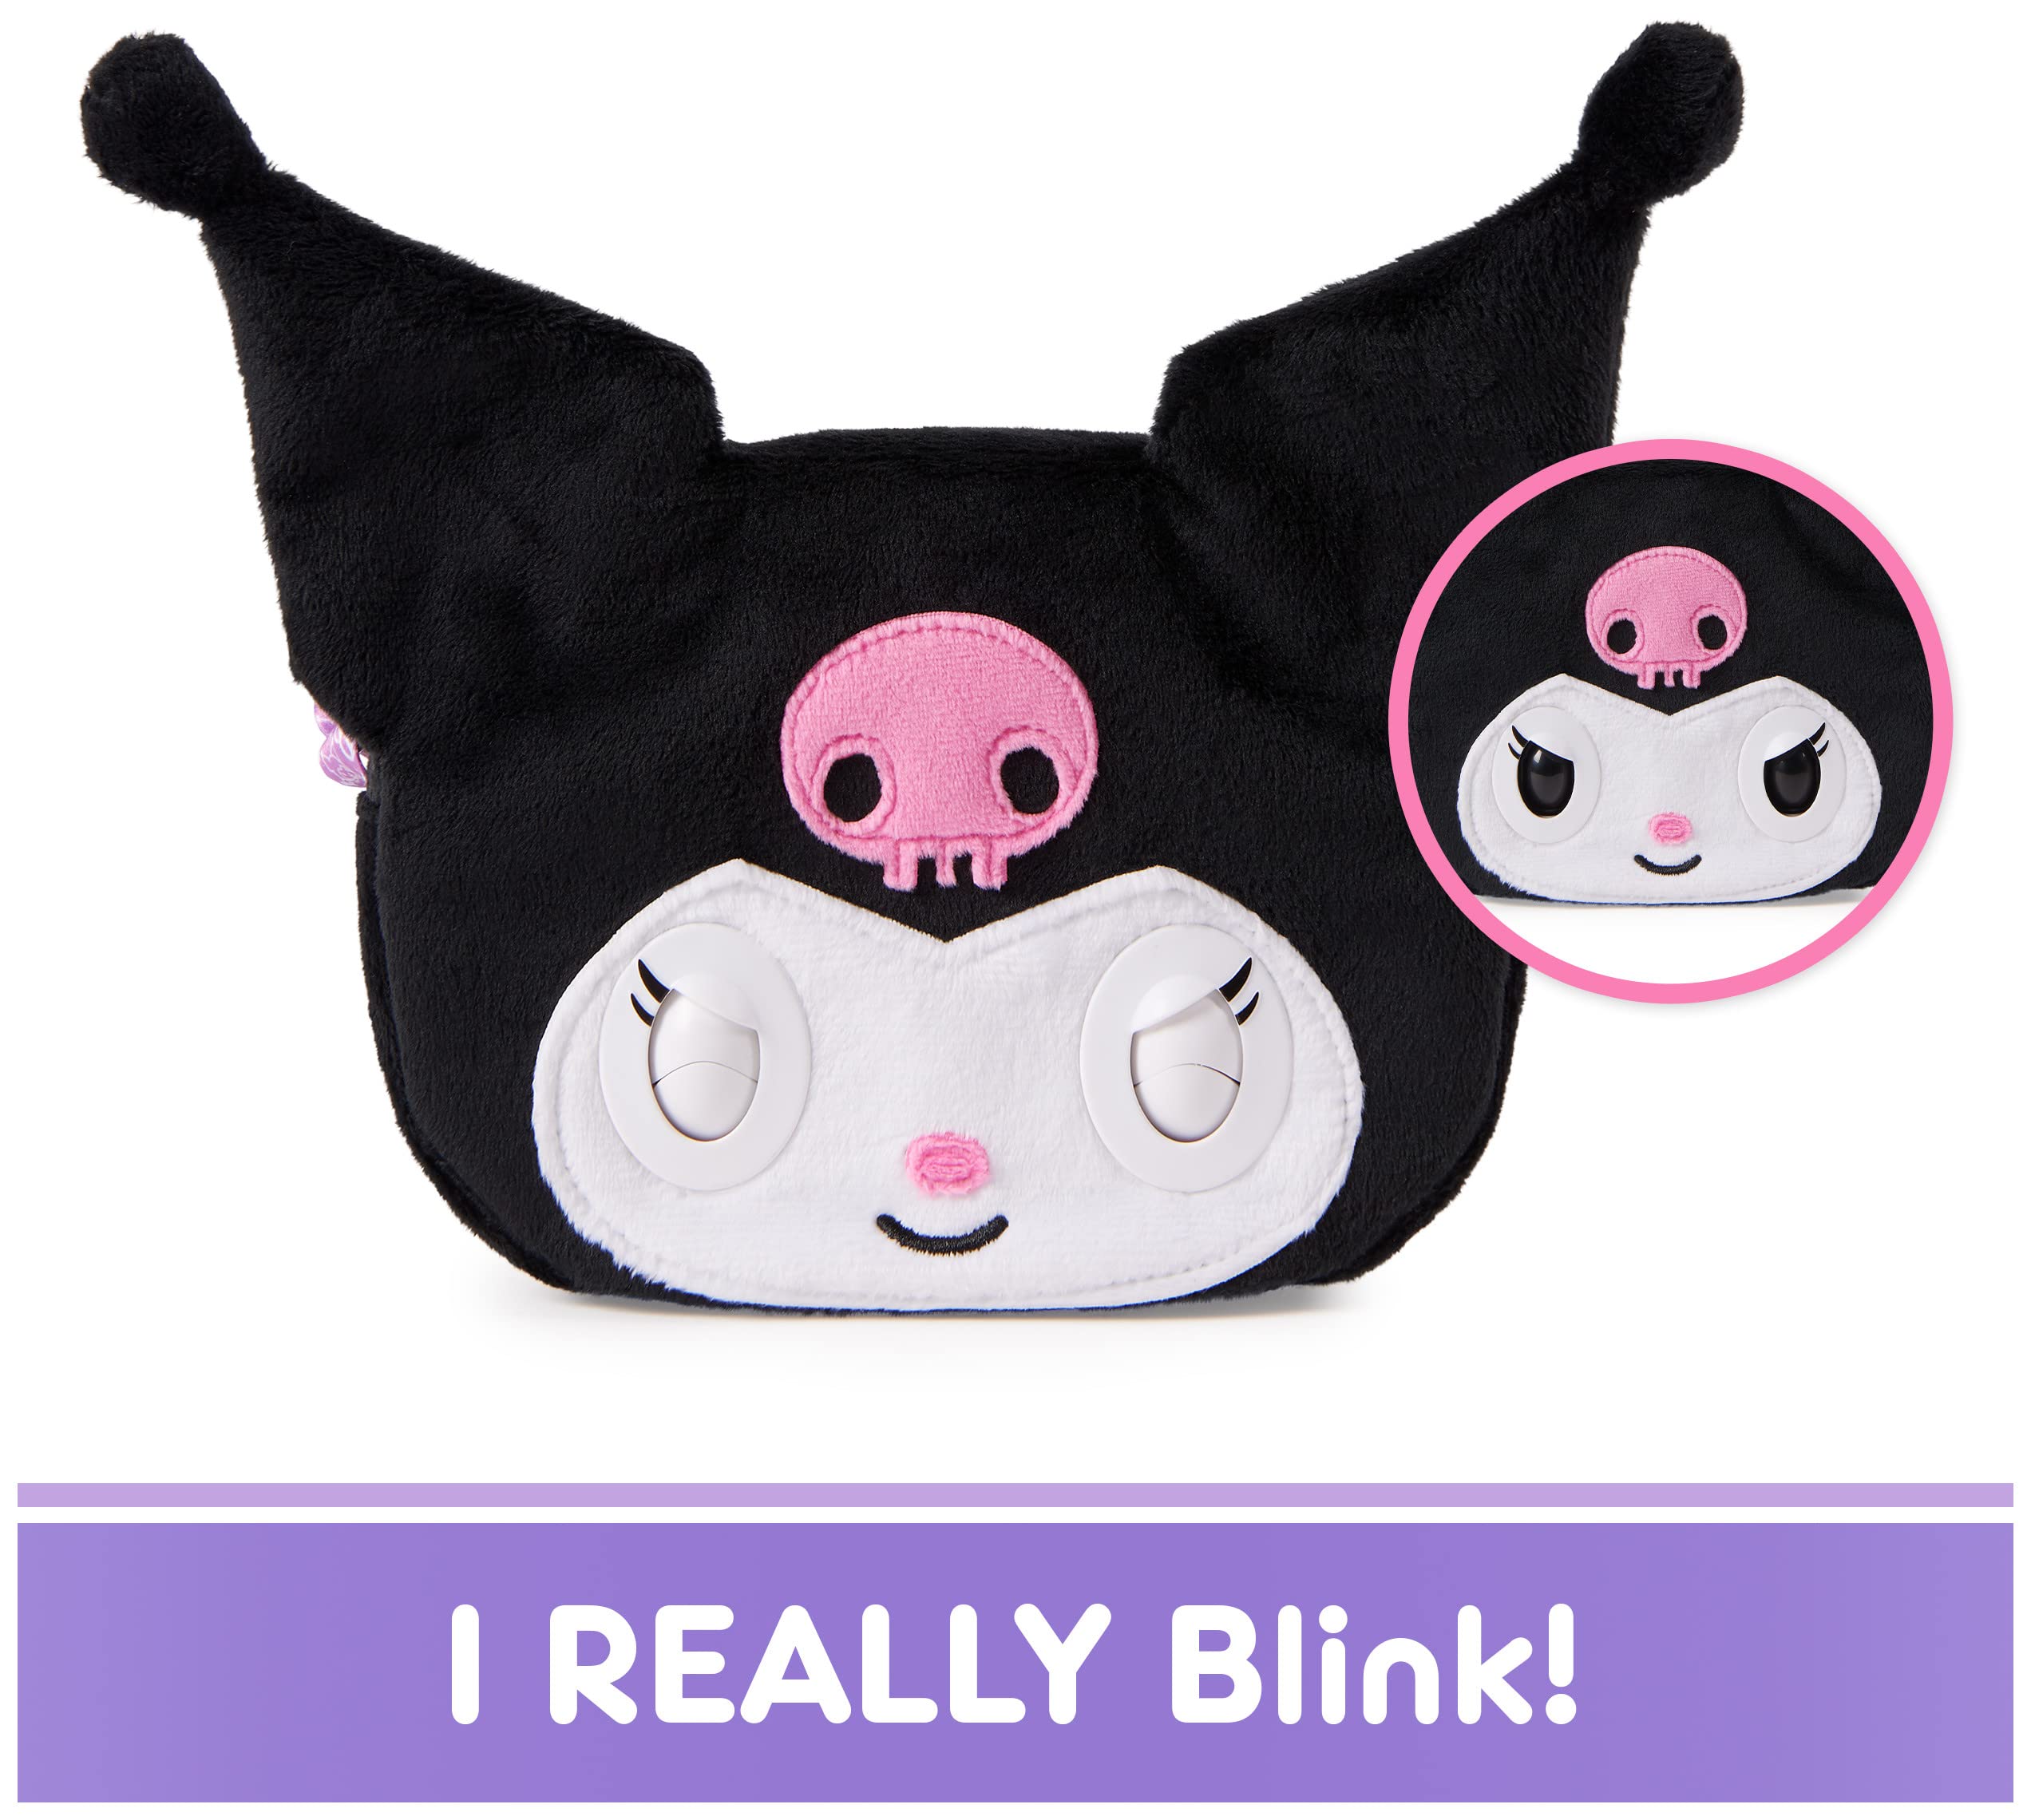 Purse Pets, Sanrio Hello Kitty and Friends, Kuromi Interactive Pet Toy & Purse, Over 30 Sounds & Reactions, Easter Basket Gifts, Kids Toys for Girls